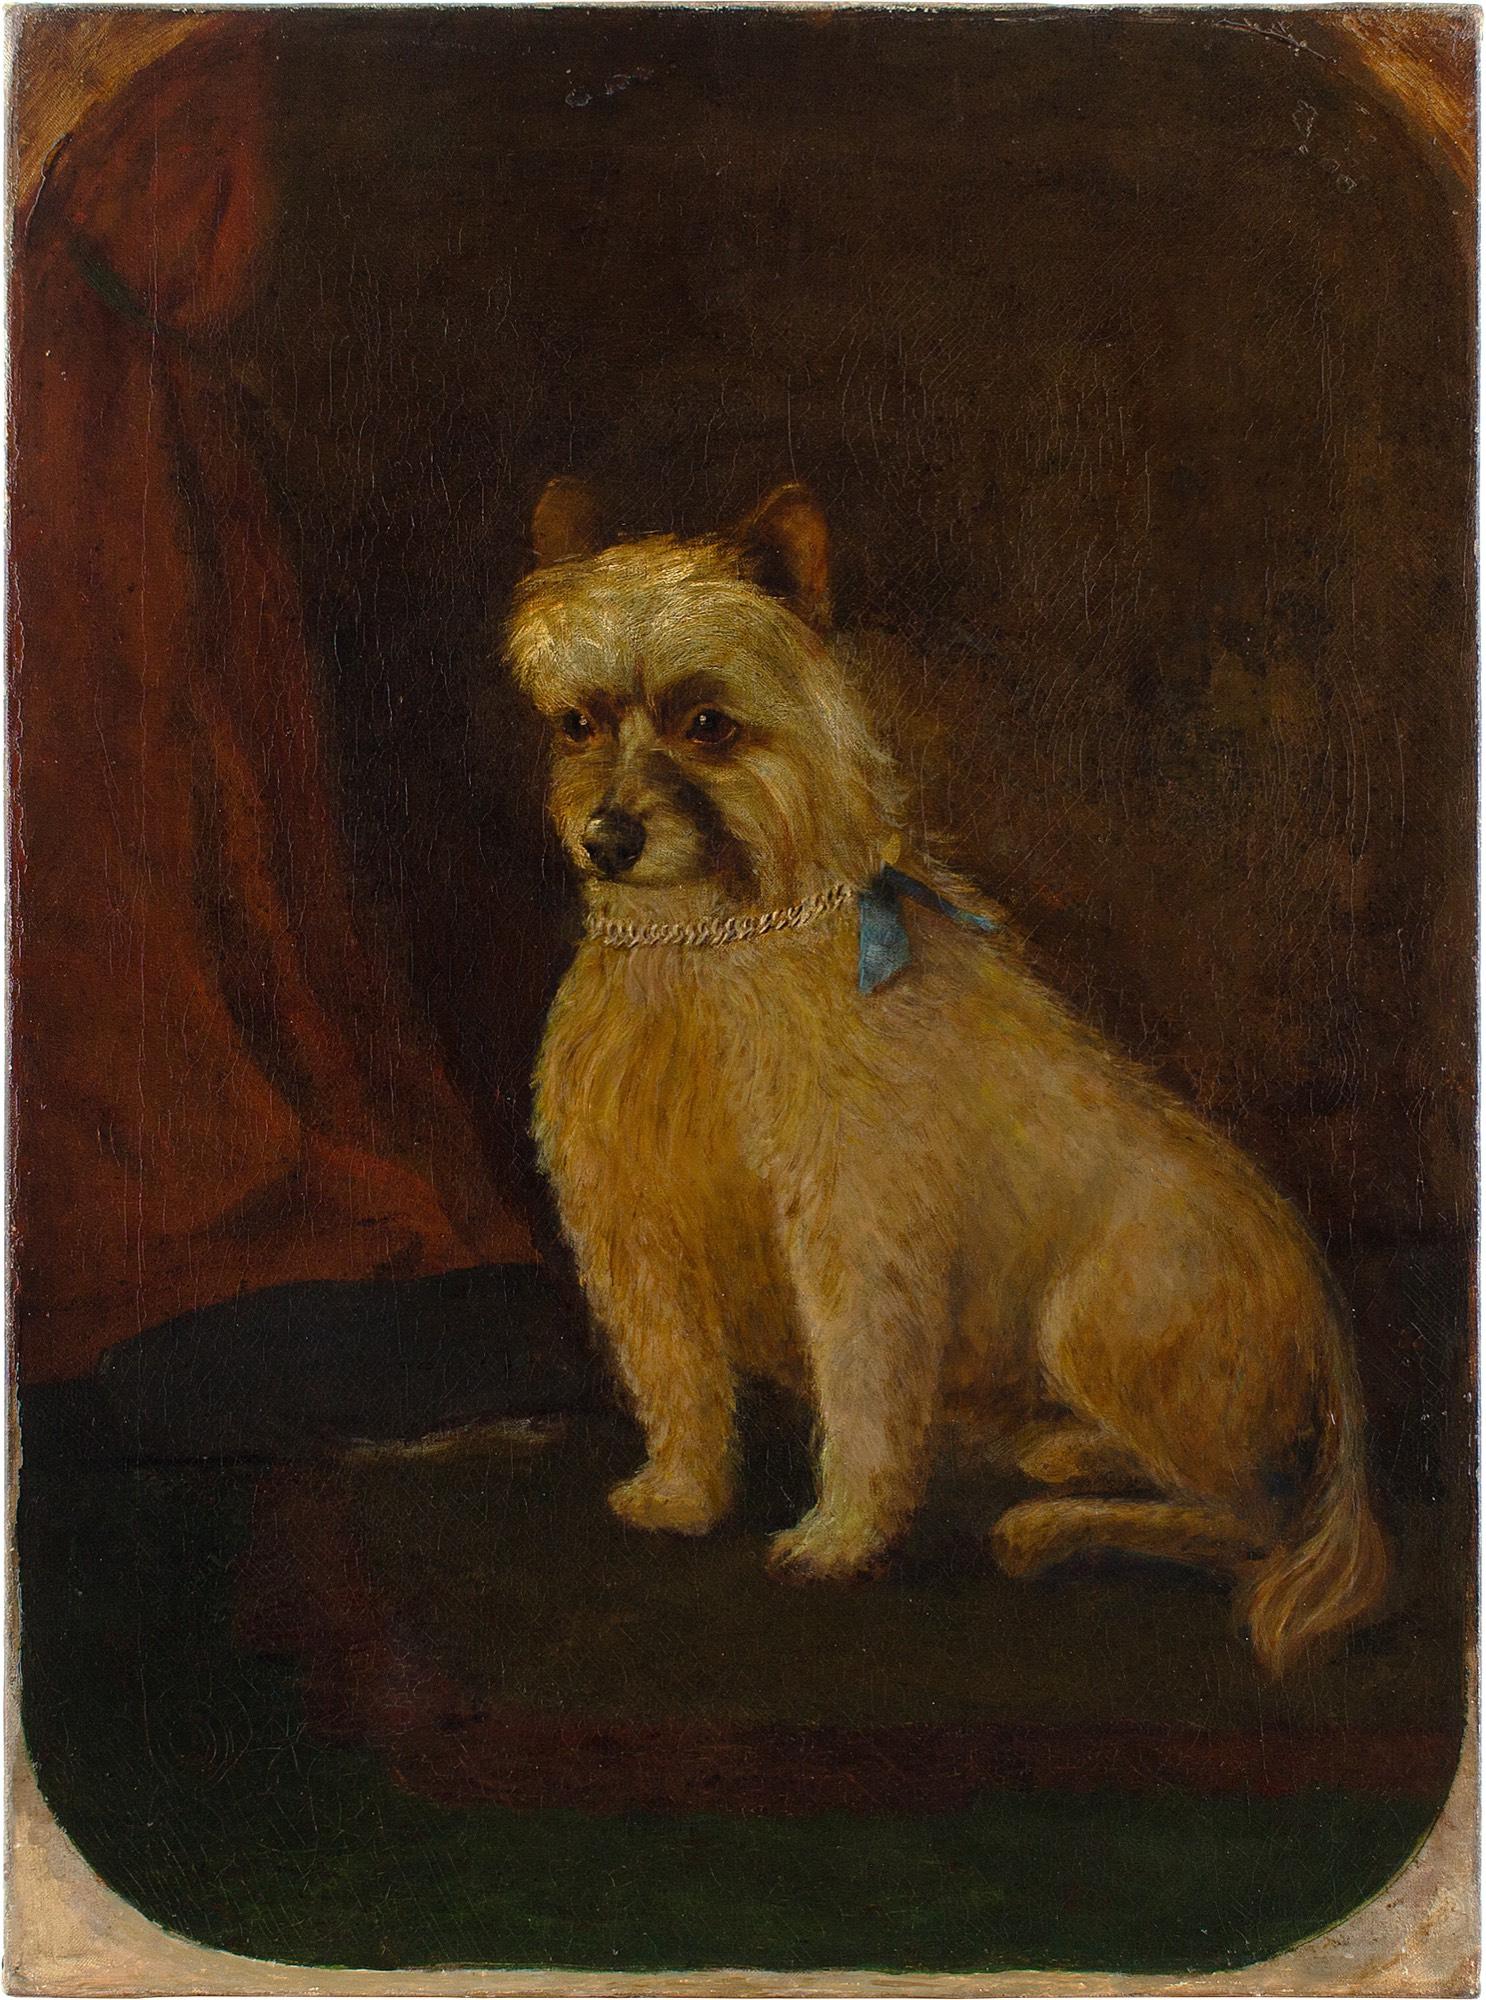 This late-19th-century oil painting by Scottish artist James Coutts Michie (1859-1919) depicts an obedient terrier wearing a chain with a blue bow.

With his lop-sided ears, squashed face, and tiny back legs, this pooch is a truly charming creature.